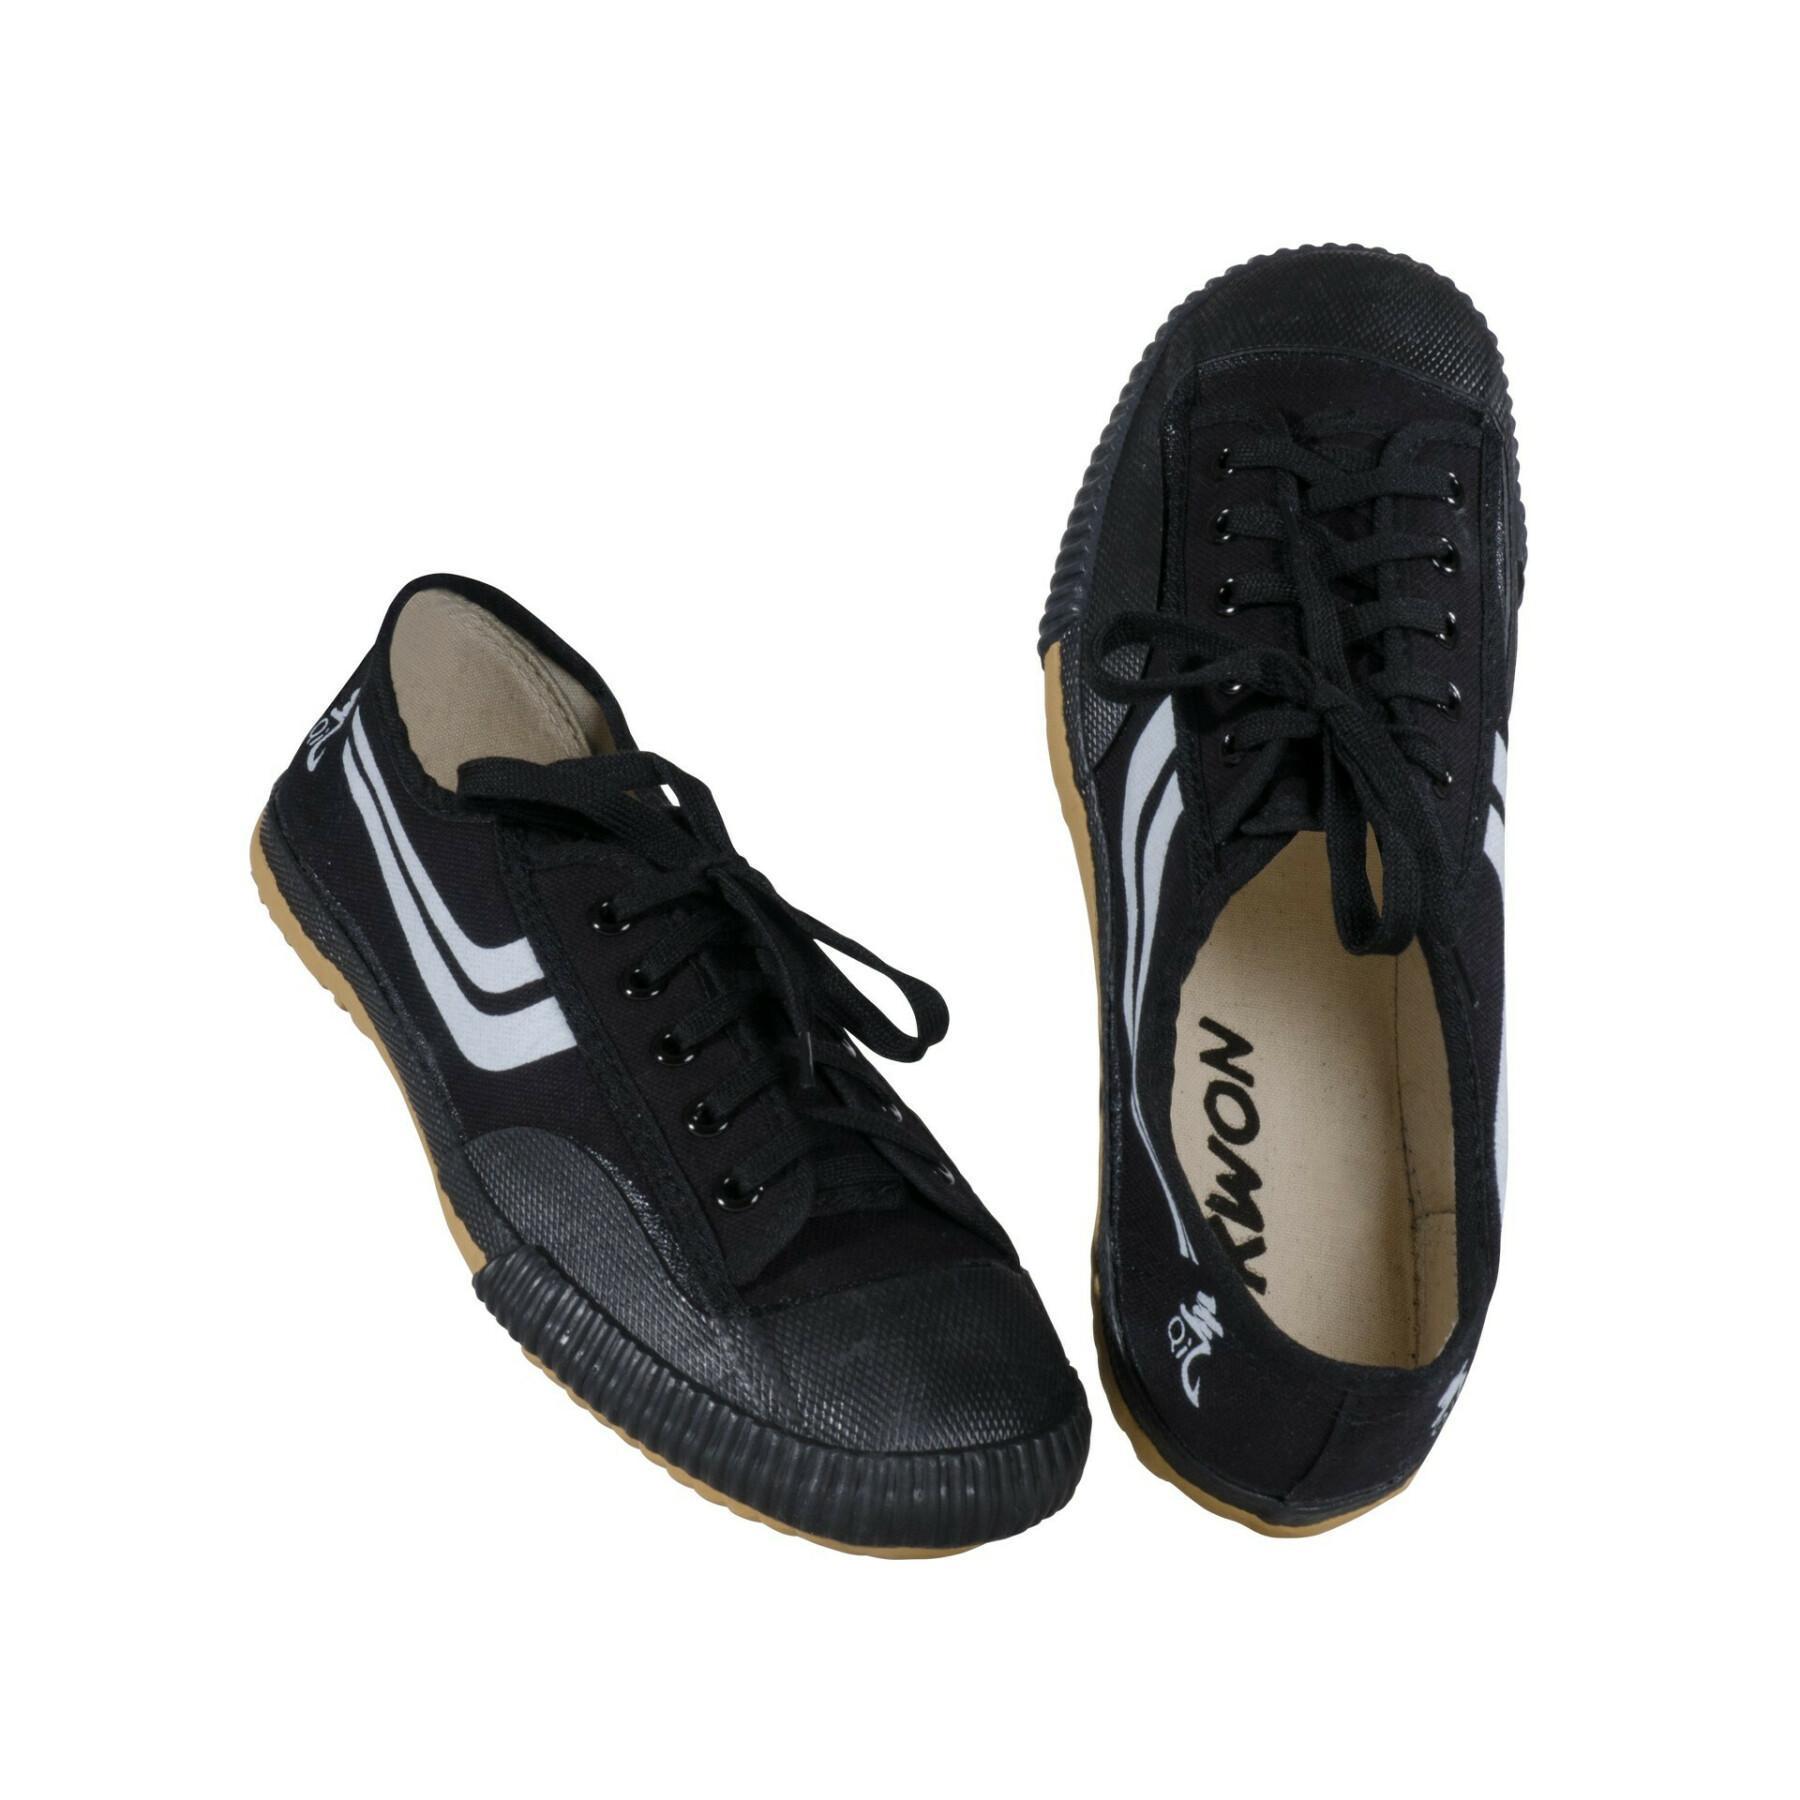 Chaussures chinoises noires - Kwon 60116